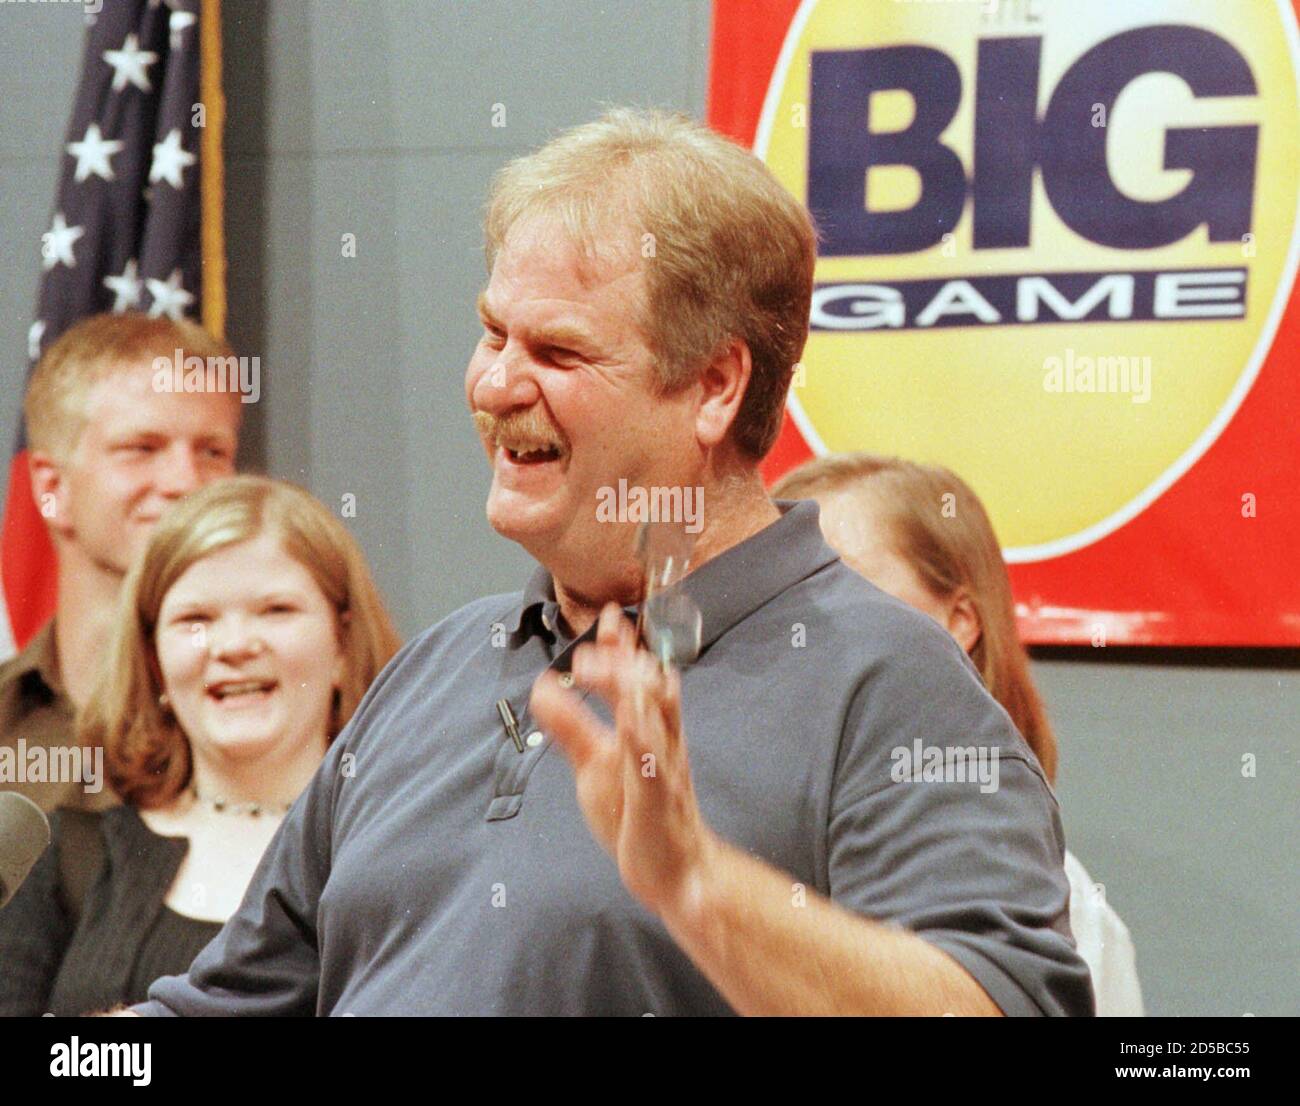 Larry Ross, with his family behind him, answers questions at a May 12 press conference at a state building in Lansing where he claimed his share of the largest lottery jackpot in North America to date. Ross said he bought a hot dog at a local store with a hundred dollar bill and took his change in lottery tickets, resulting in the winning ticket. The Rosses chose the cash option for their share of the prize winnings, $181.5 million, allowing him to collect a one-time prize payment of approximately $60 million after taxes.  RC/HB Stock Photo